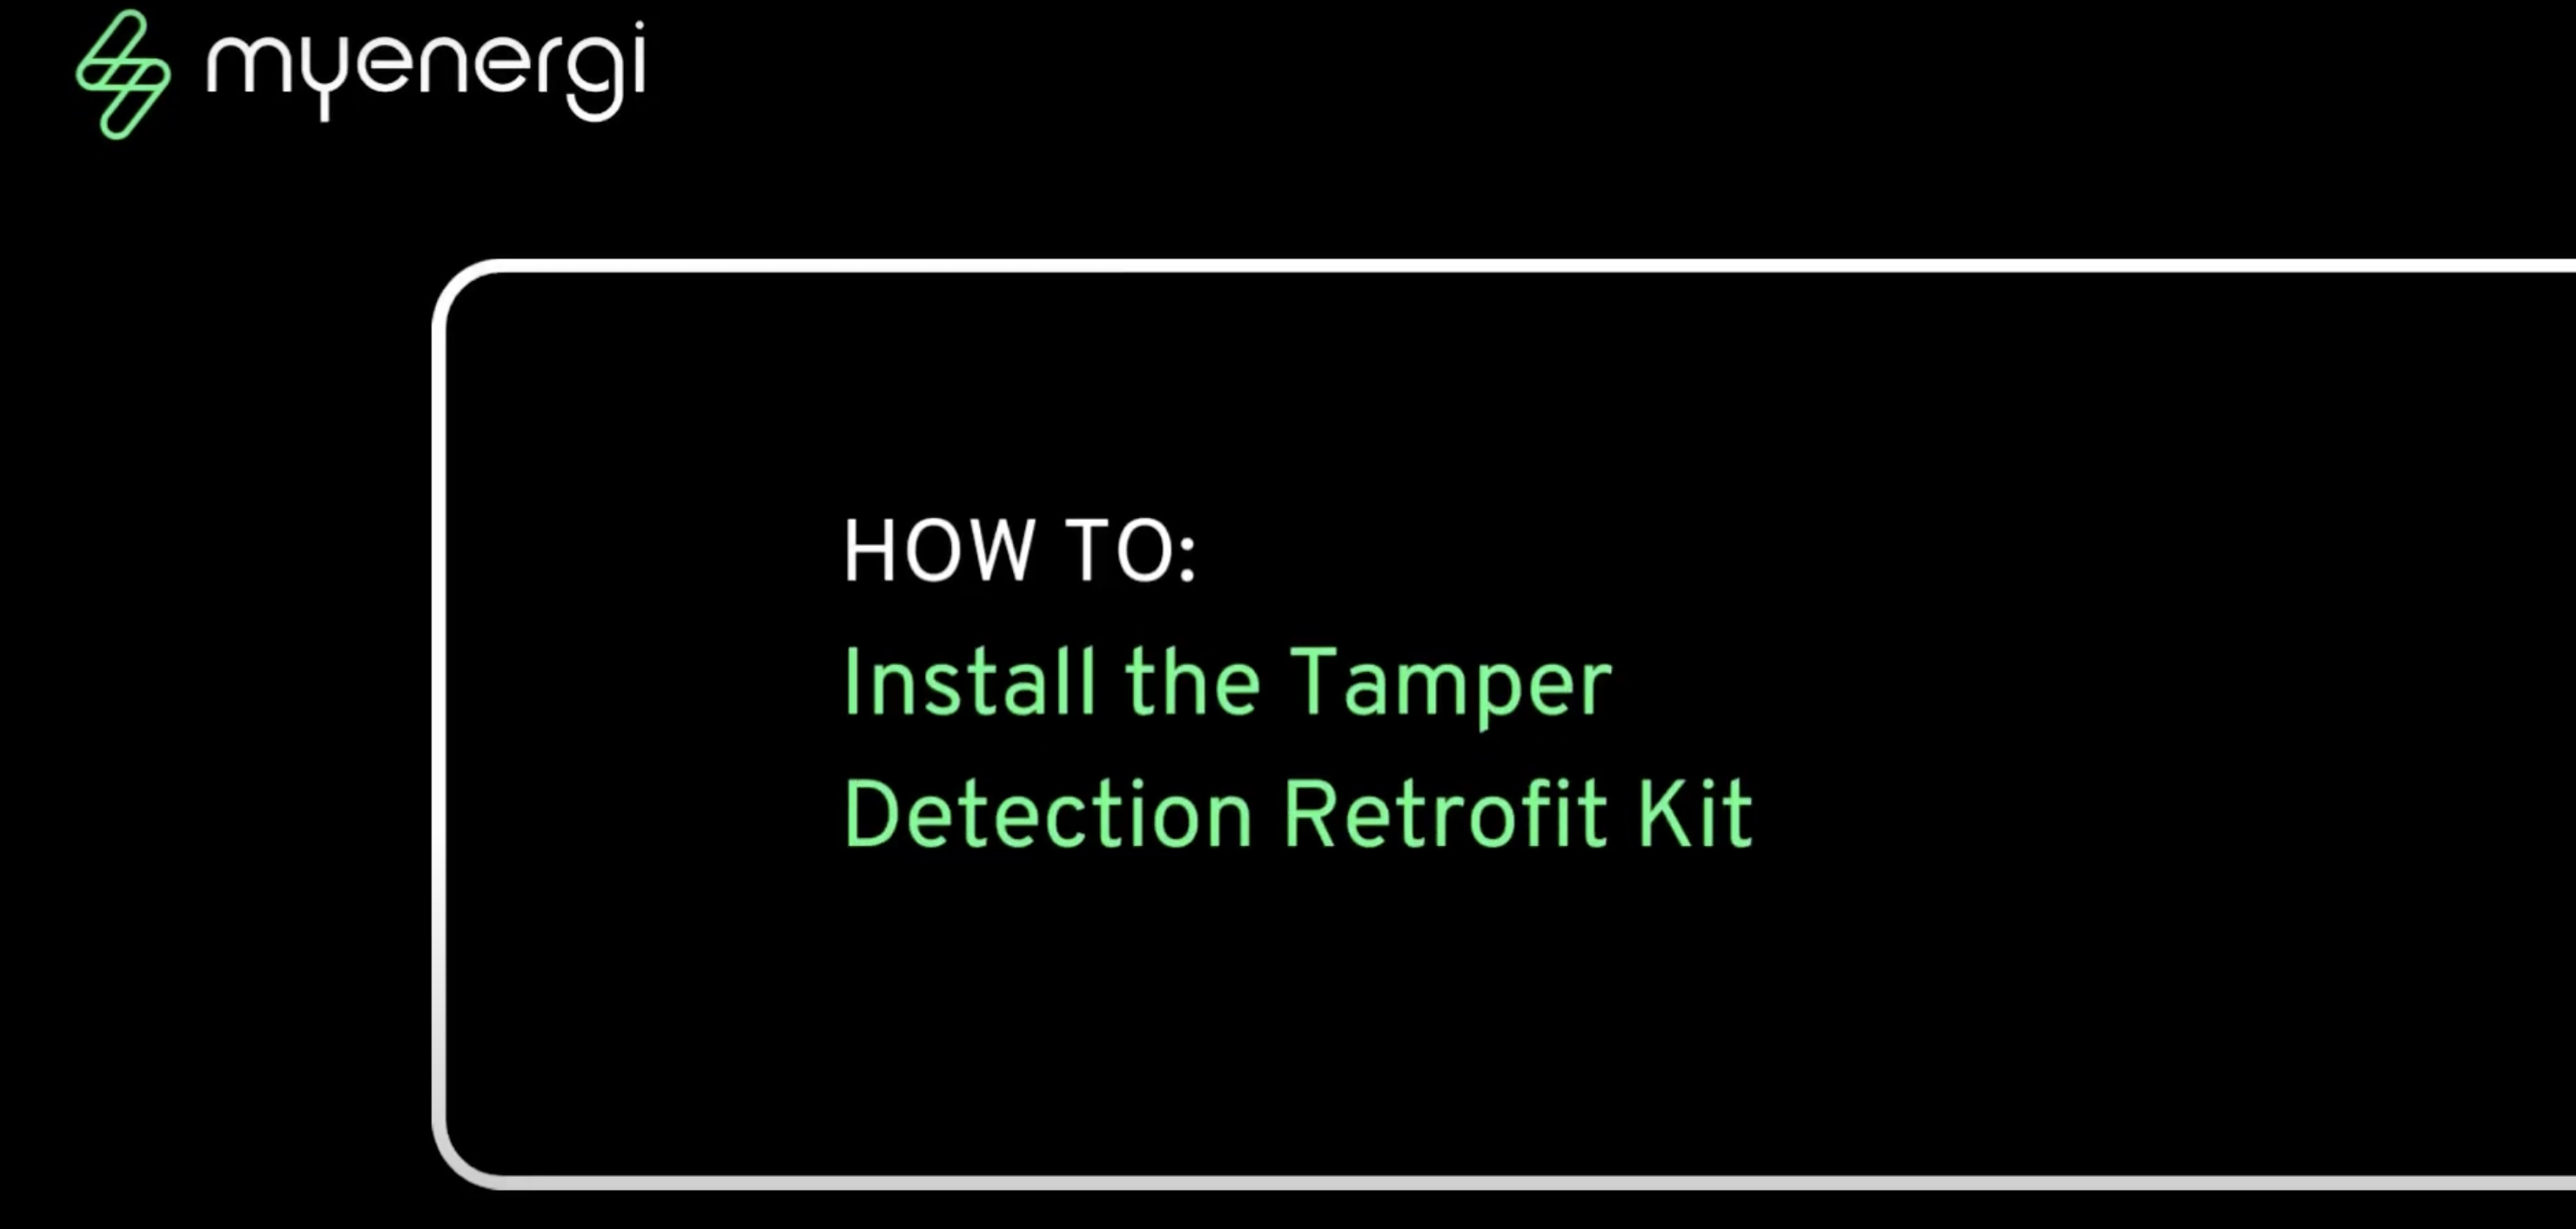 How to install a tamper kit